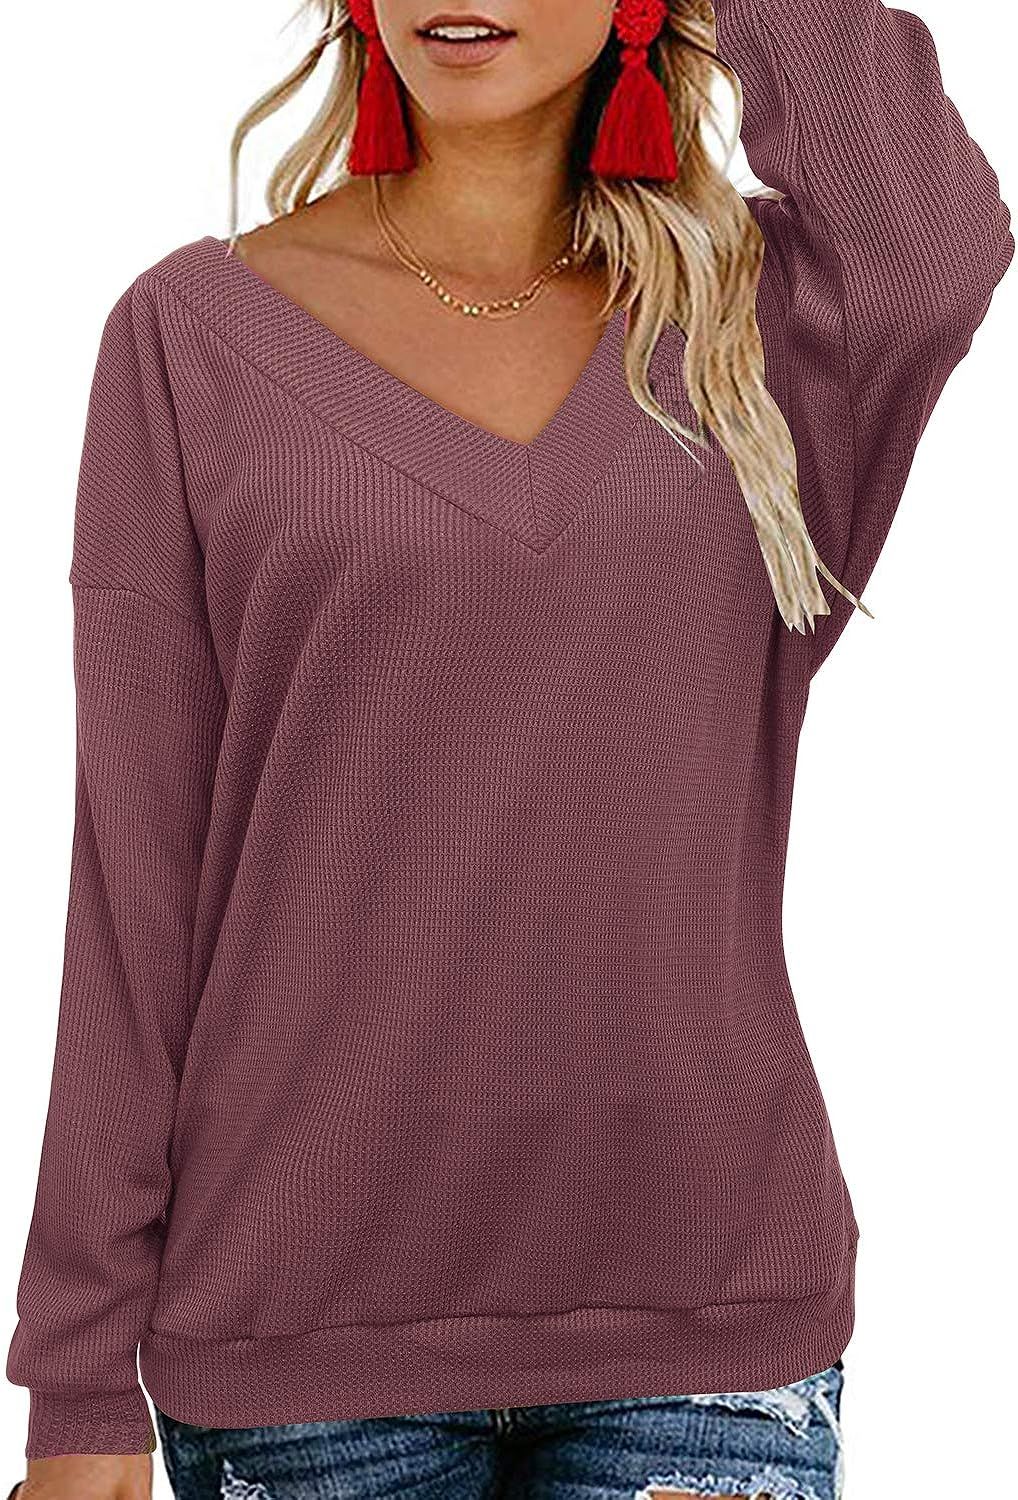 OUGES Womens Tie Back Knit Tops V Neck Long Sleeve Casual Sweater Pullover | Amazon (US)